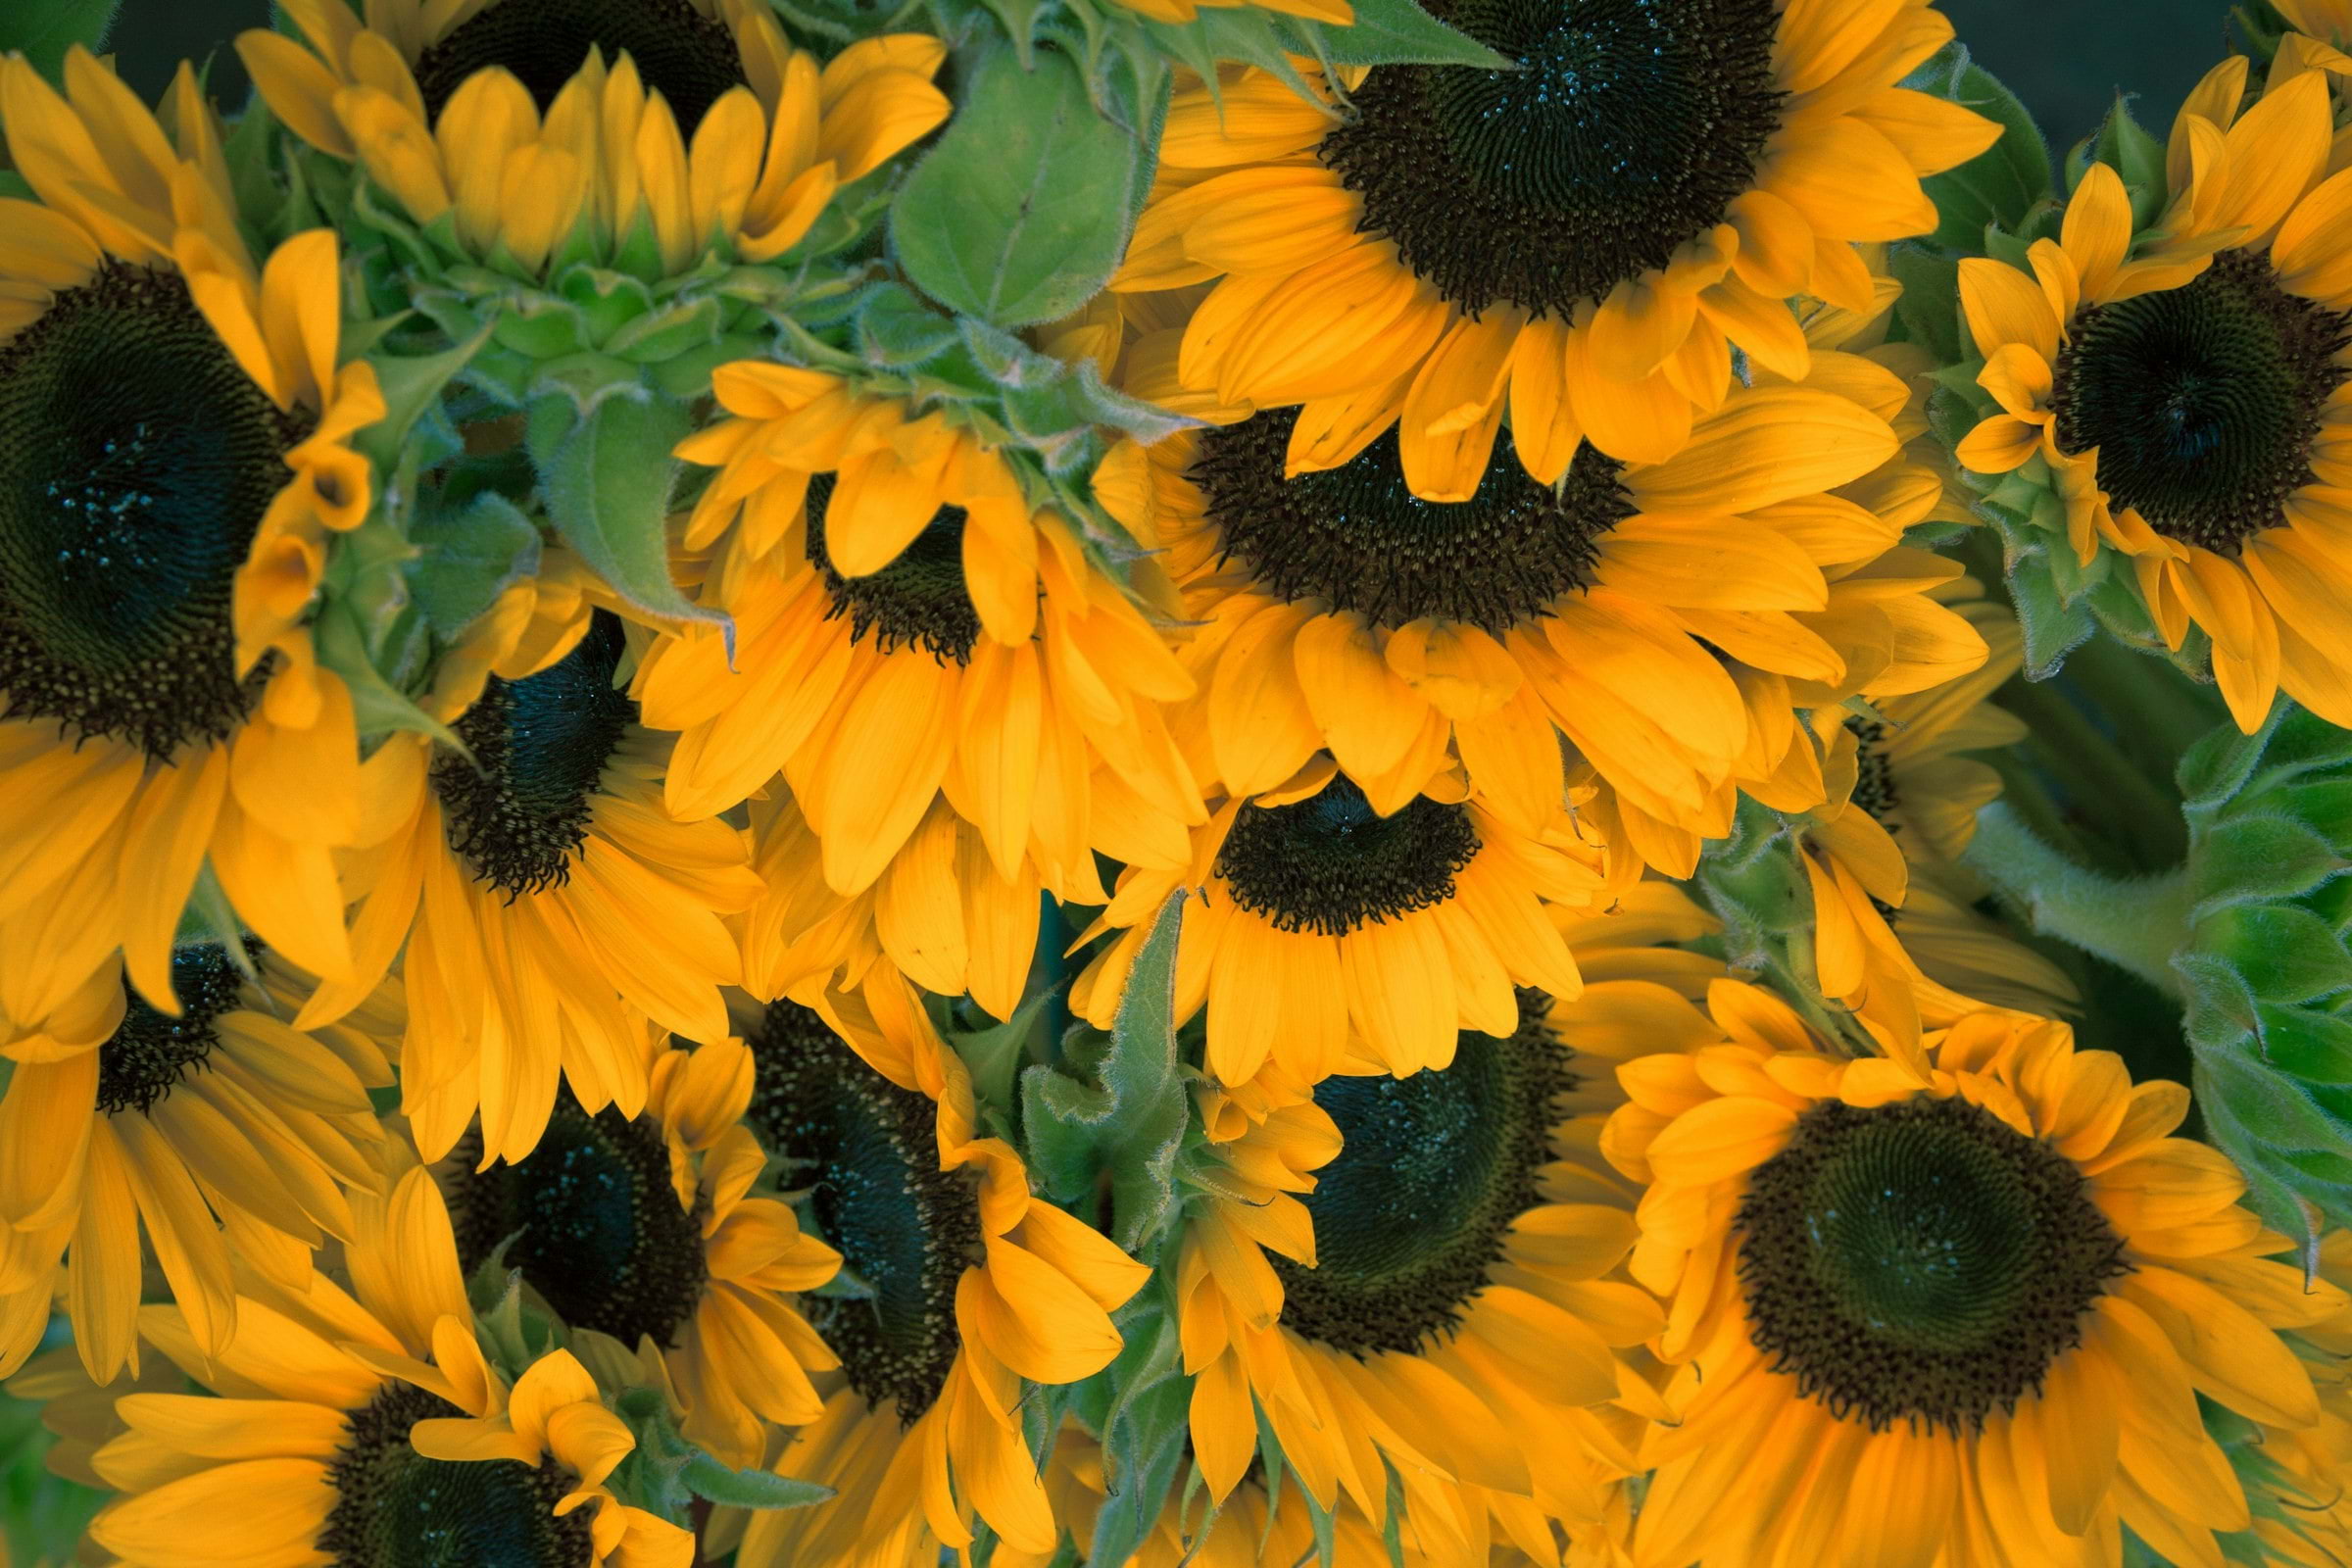 Step into spring at the Upside Down Sunflower Garden in Westfield London